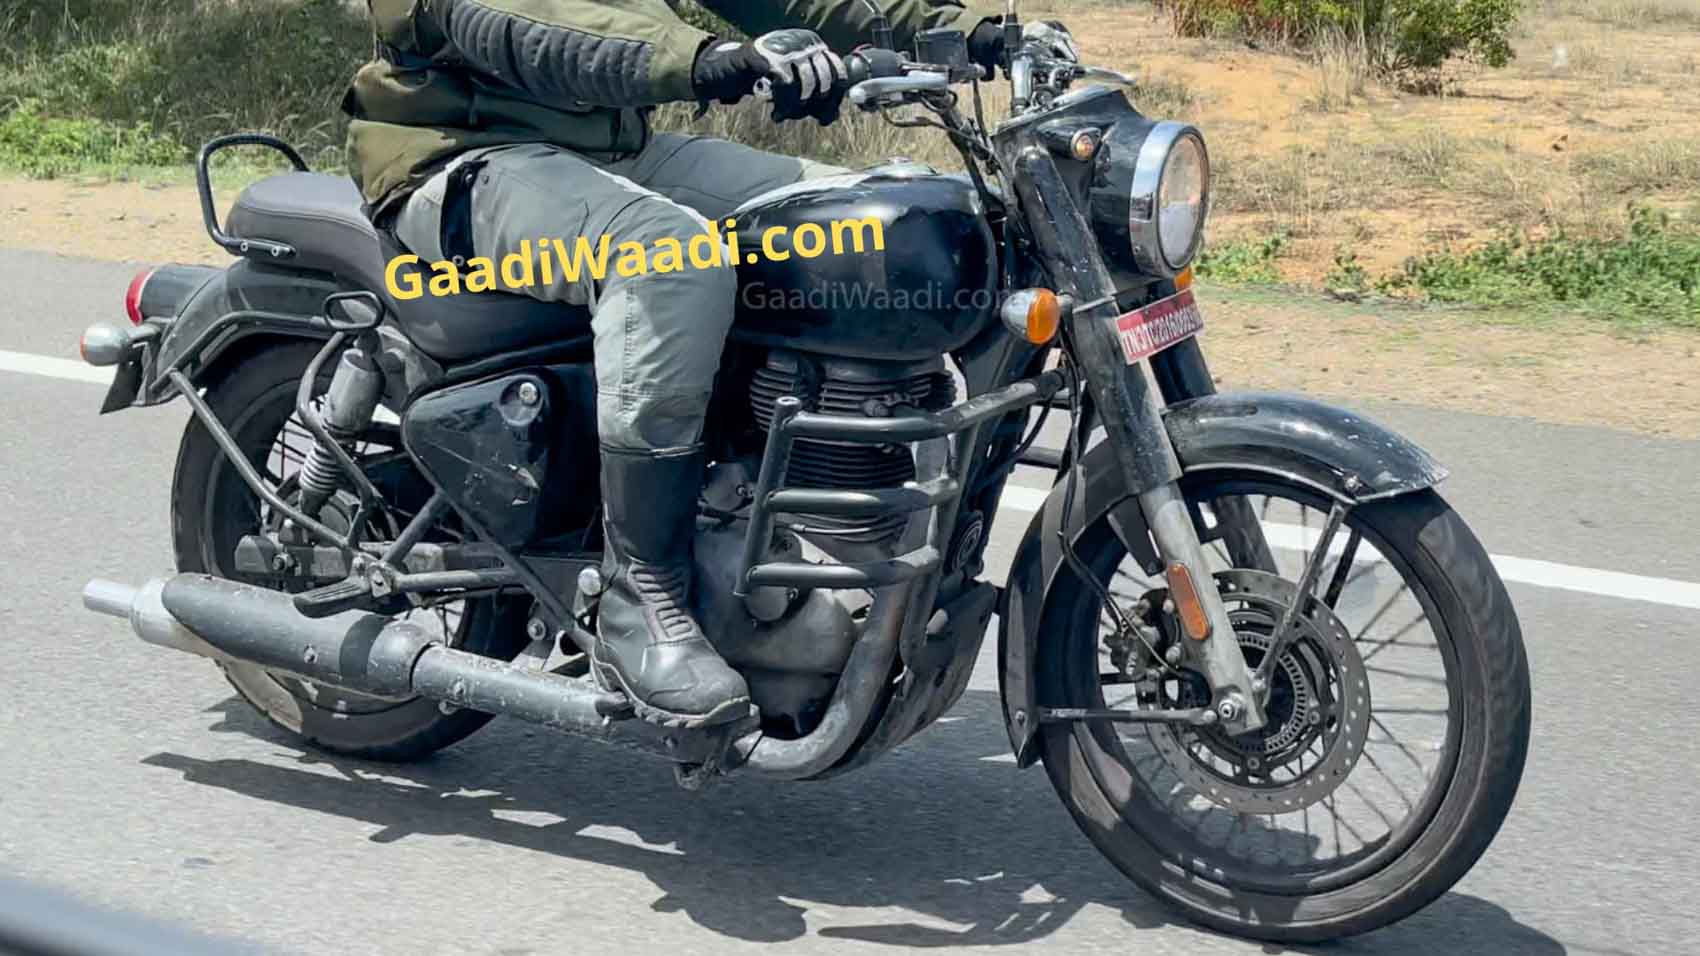 2022 Royal Enfield Bullet 350 (Next-Gen) Spotted Clearly Showing ...